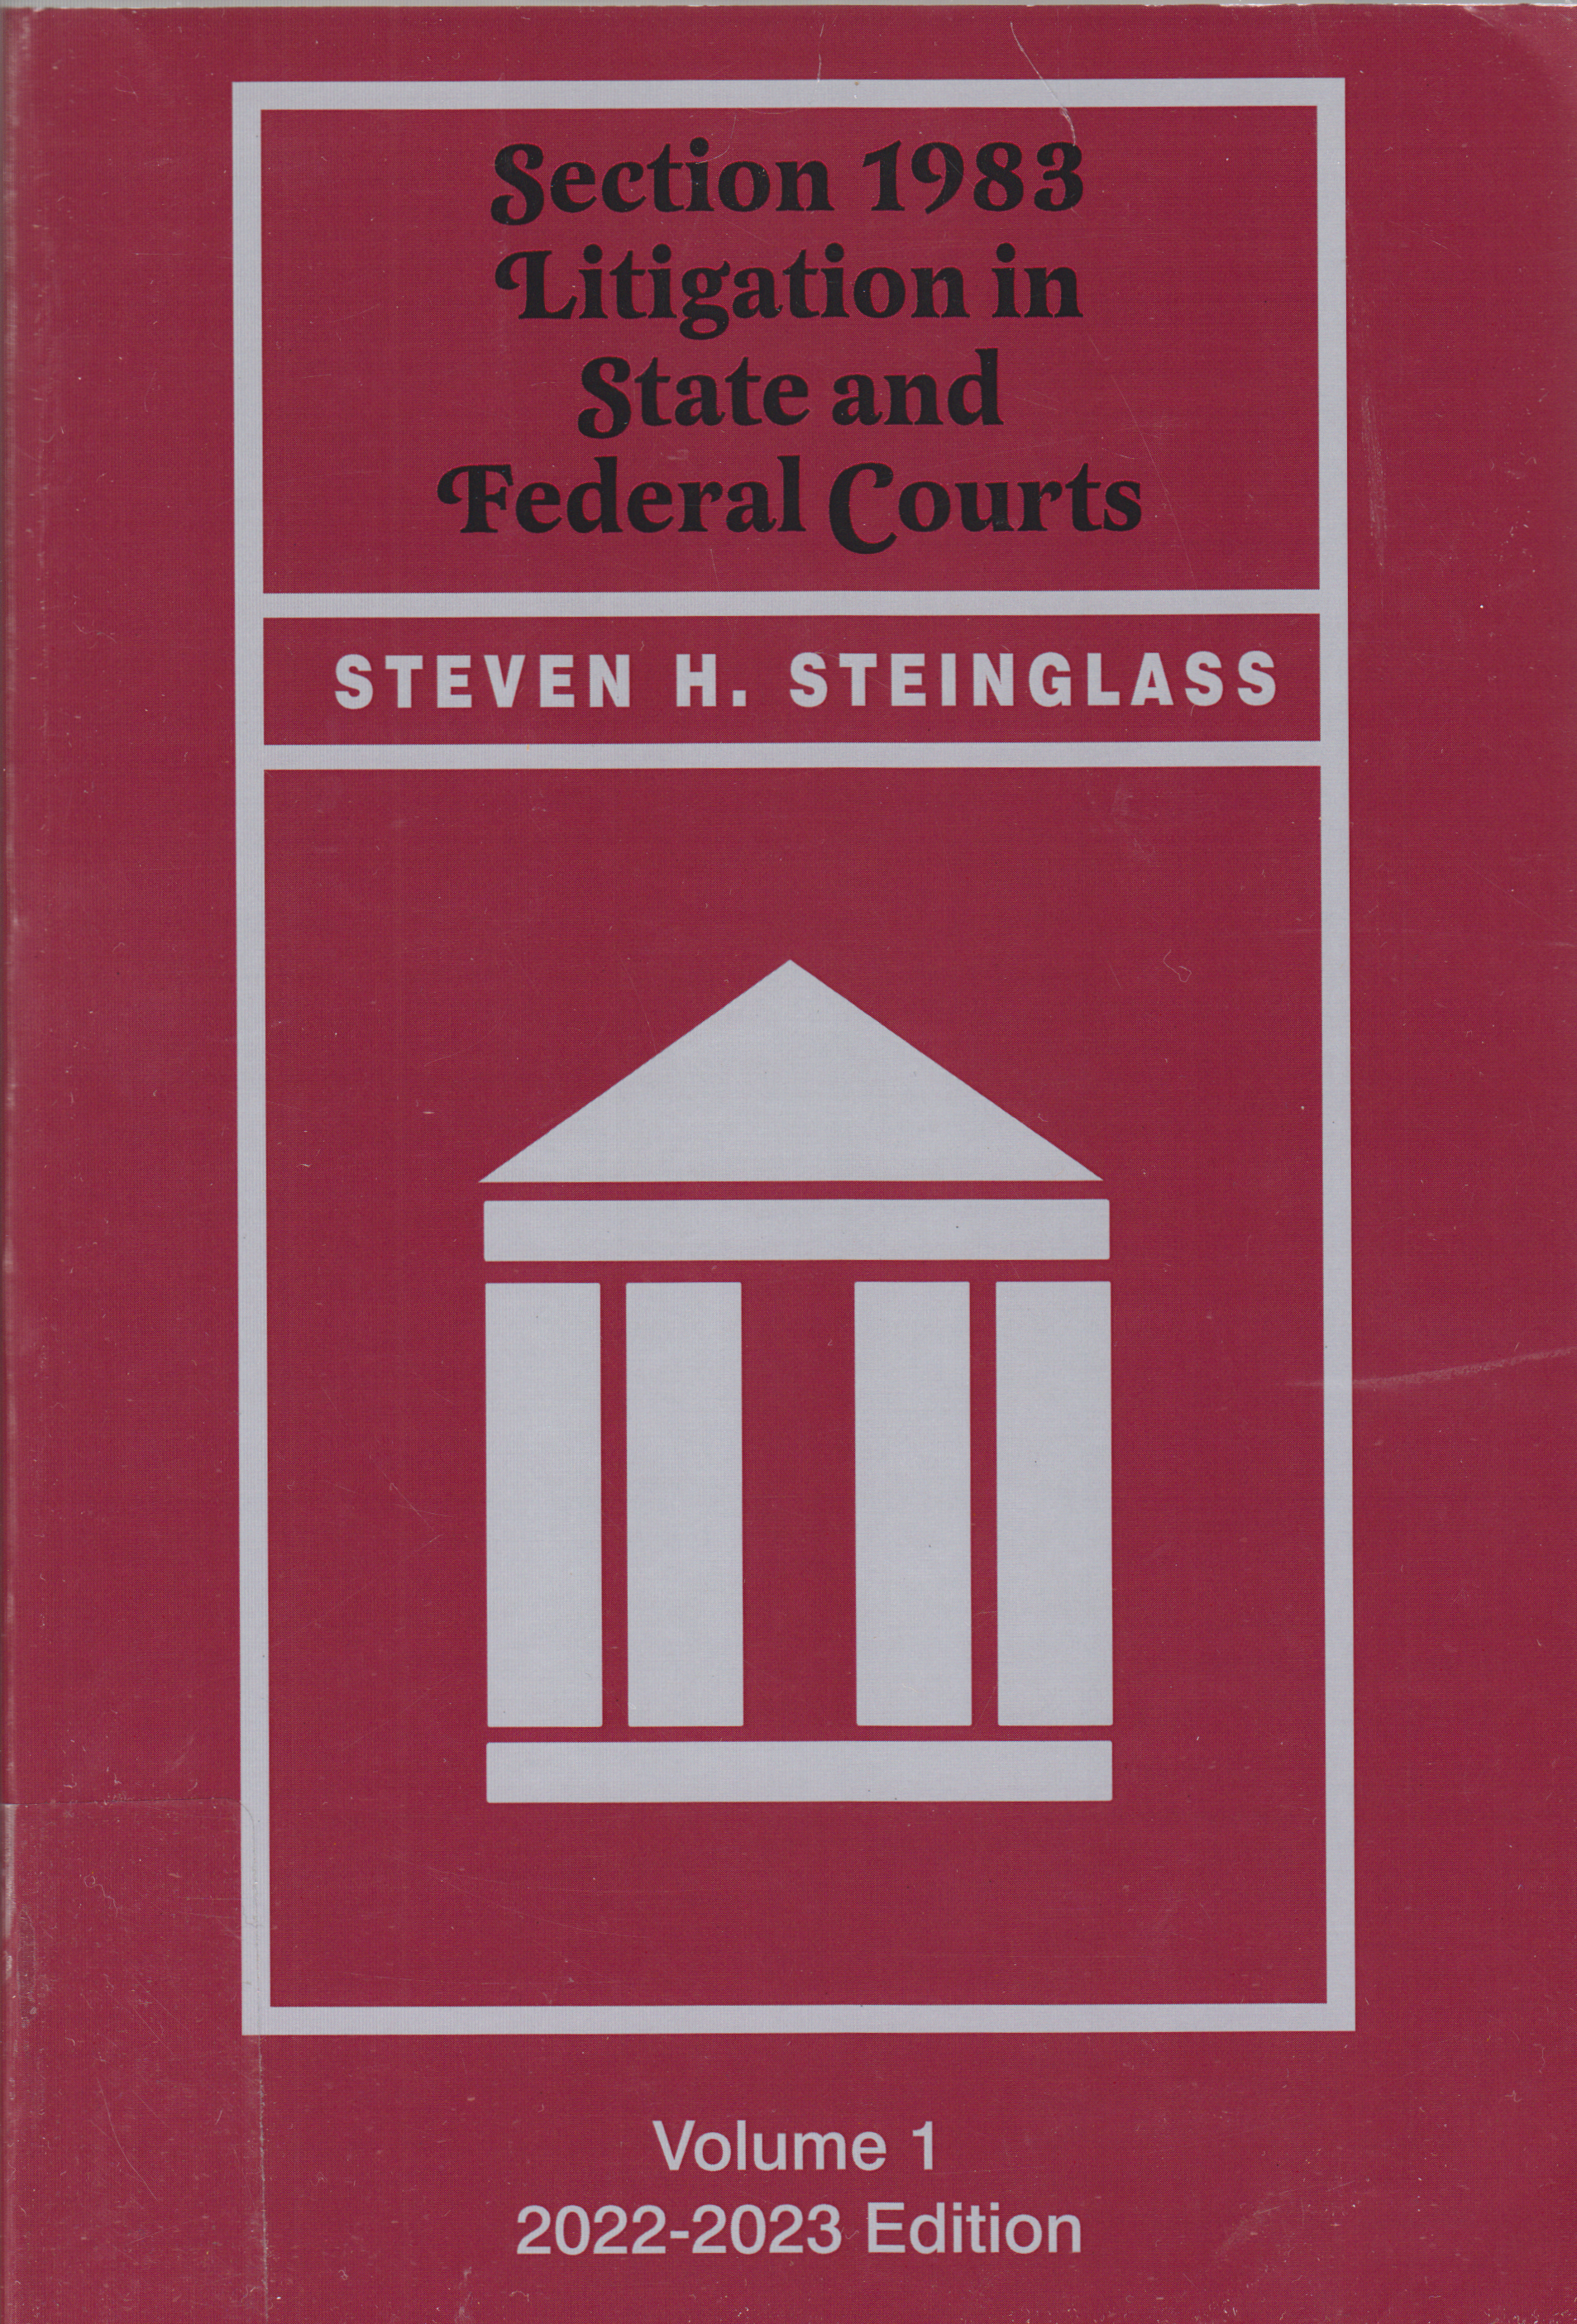 Section 1983 Litigation in State and Federal Courts Steven Steinglass Volume 1 2022-2023 Edition